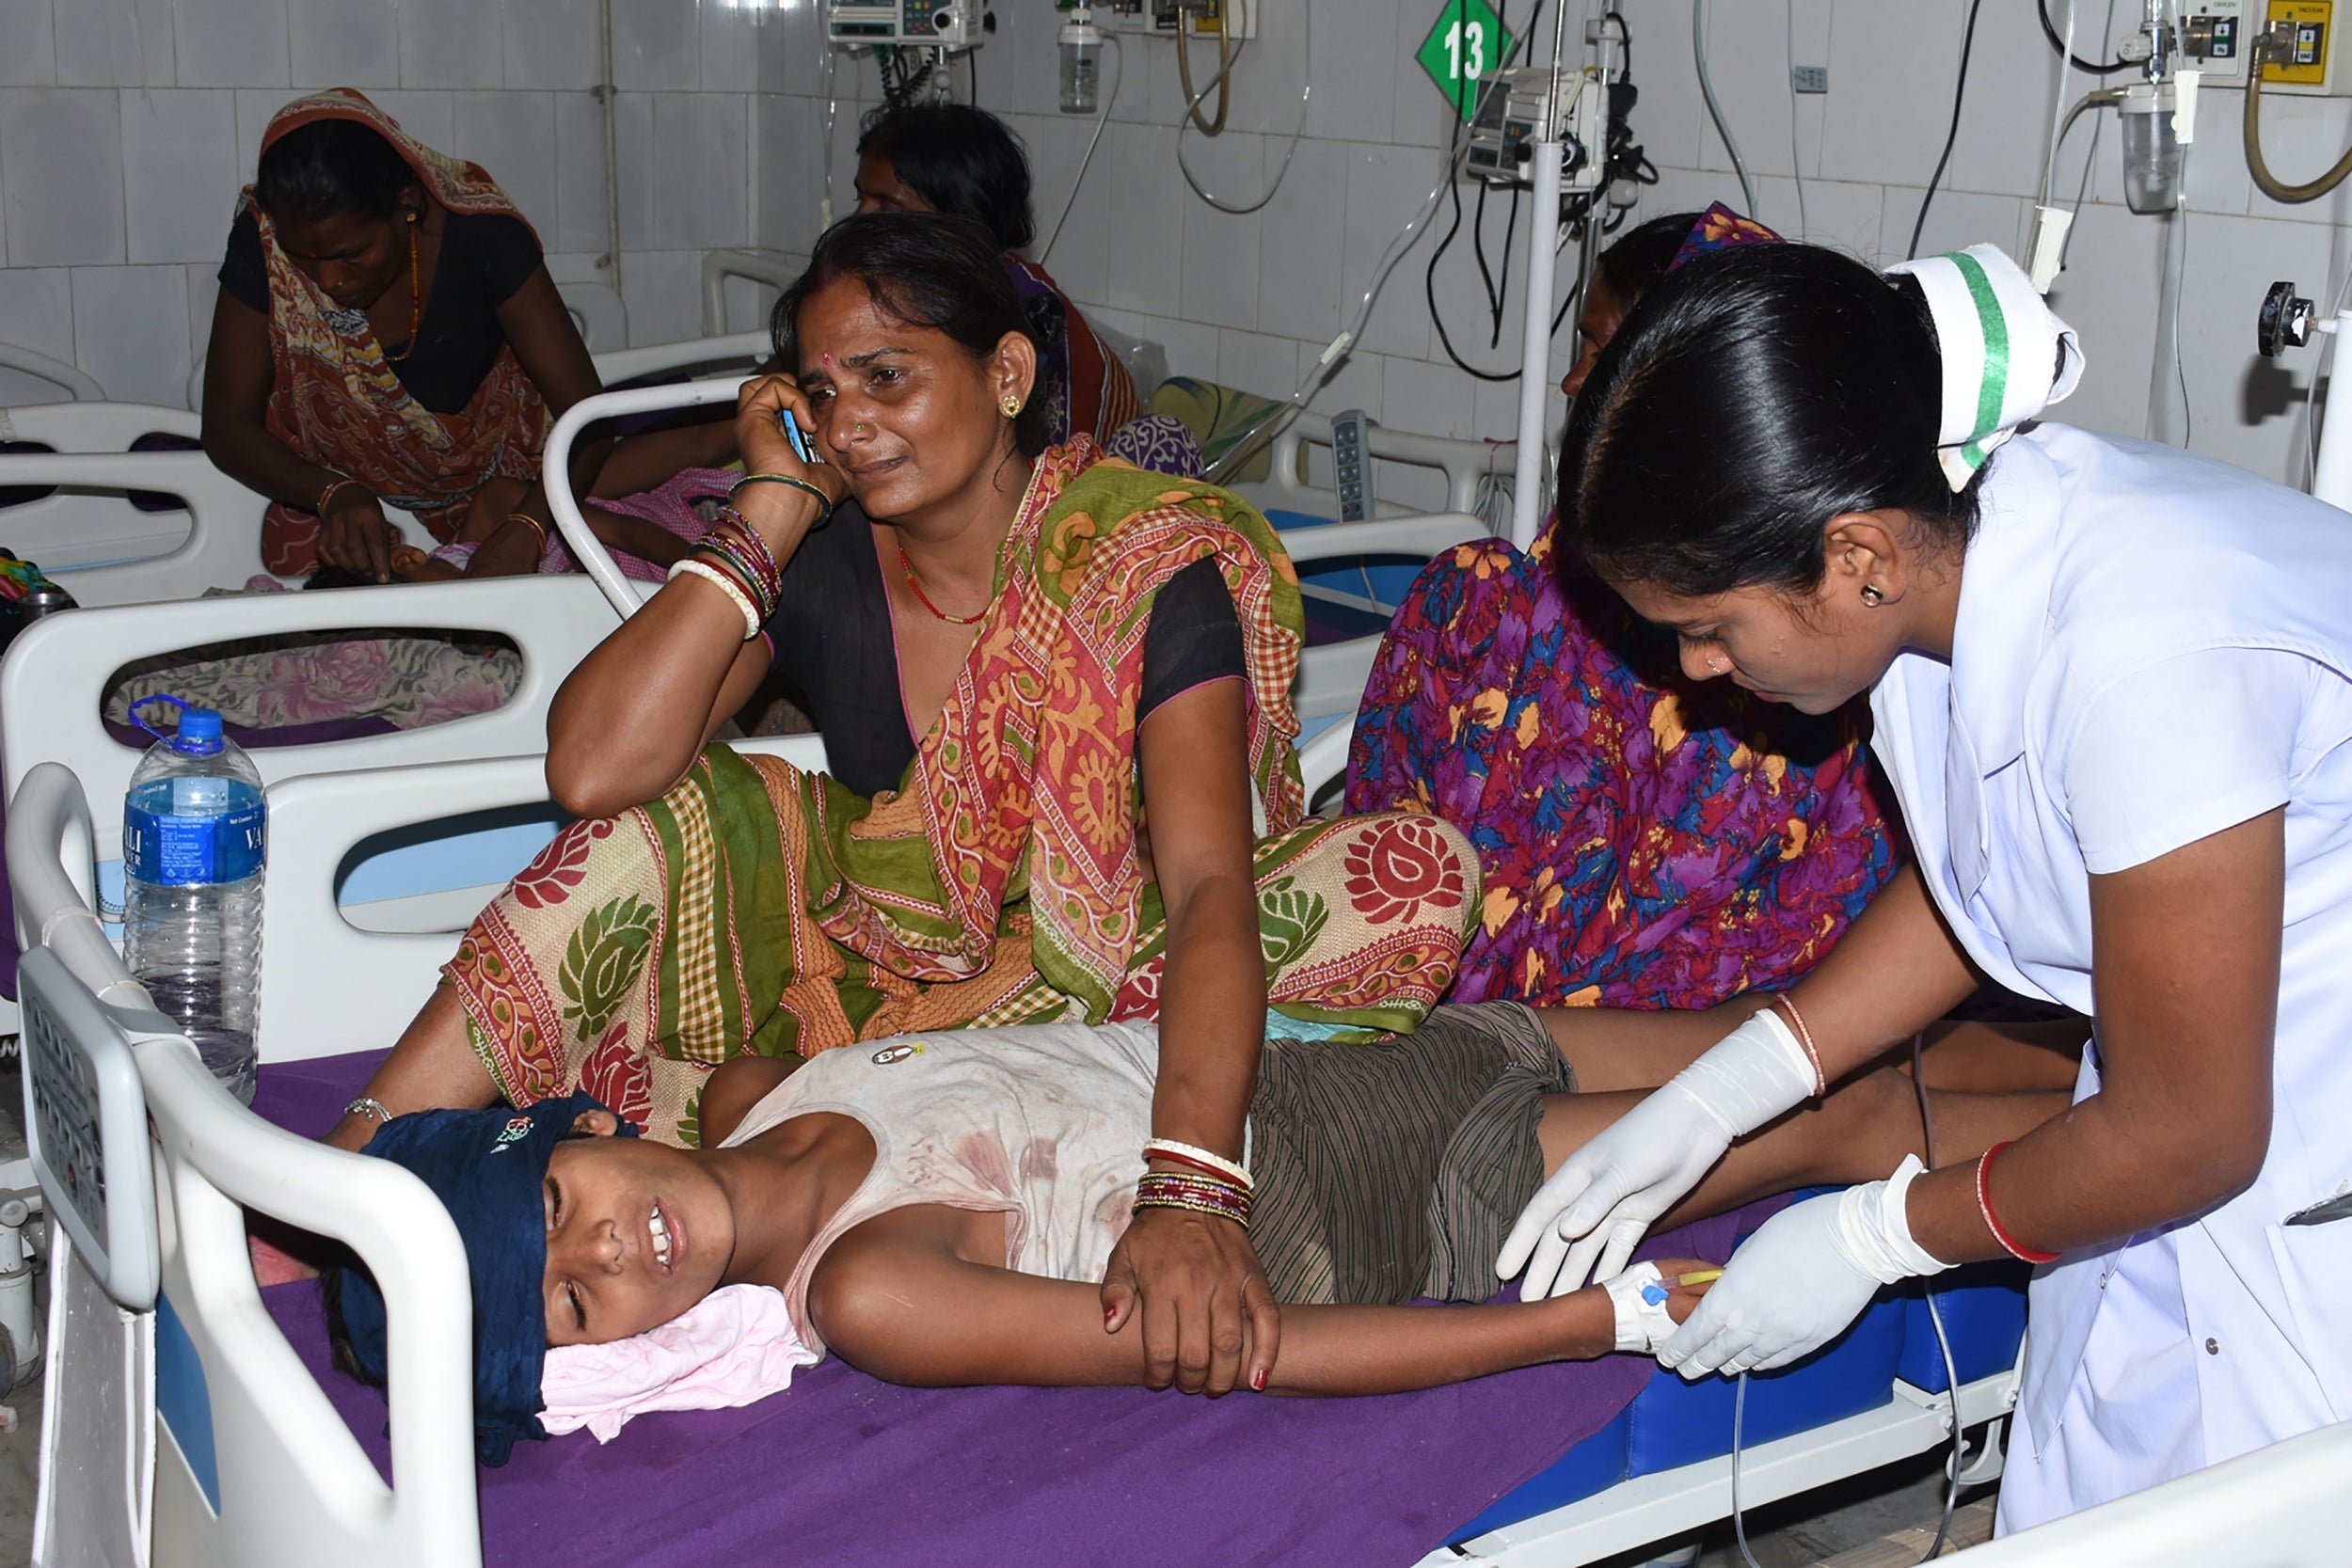 An Indian child receives medical treatment due to Acute Encephalitis Syndrome (AES) in a hospital in Muzaffarpur following month-long lychee harvesting season